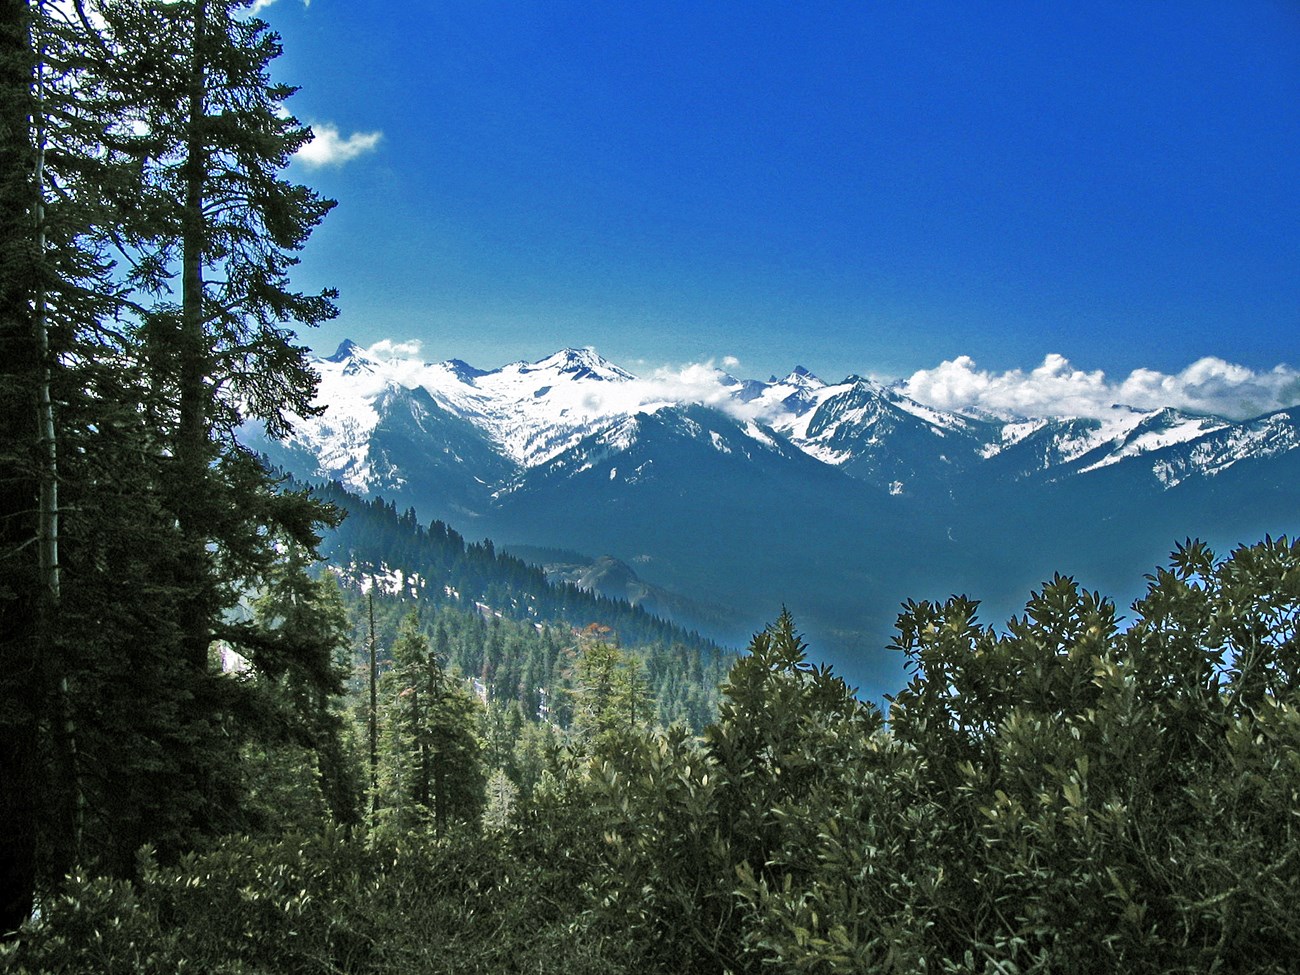 A look over a tree-covered mountain slope with snow-capped mountain peaks in the distance.